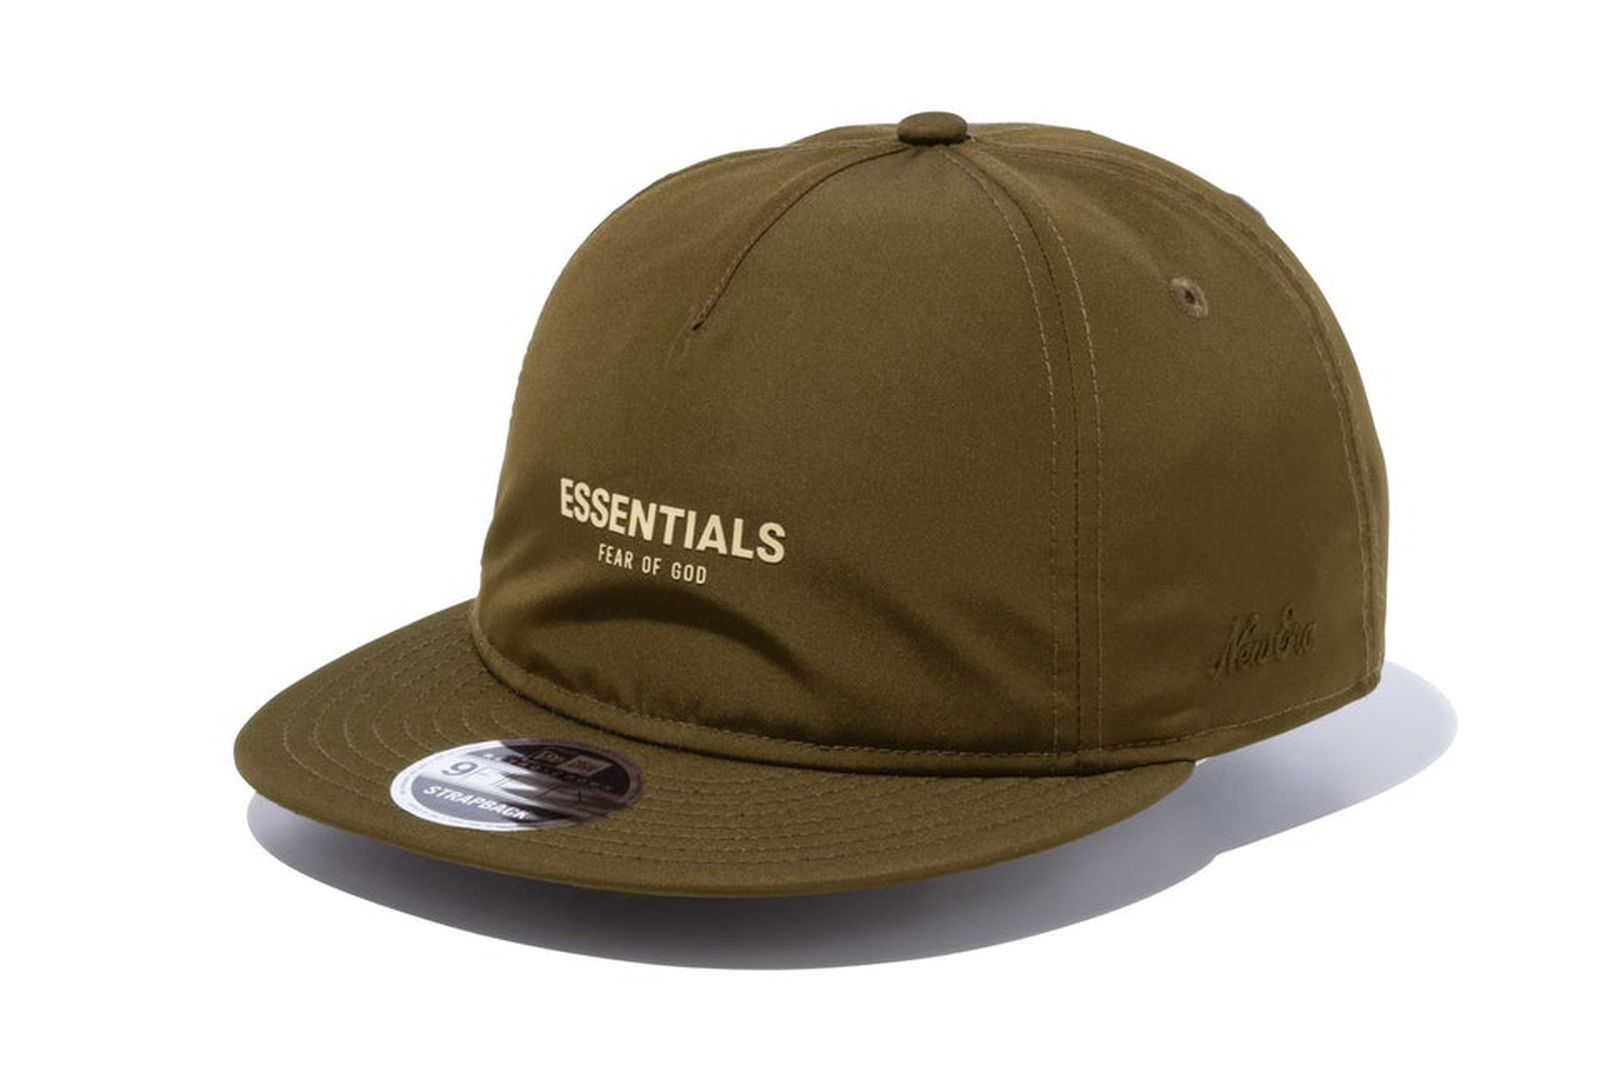 fear of god essentials fog new era hat collab 59fifty 9fifty colorways price release date info buy jerry lorenzo ss22 info website authentic